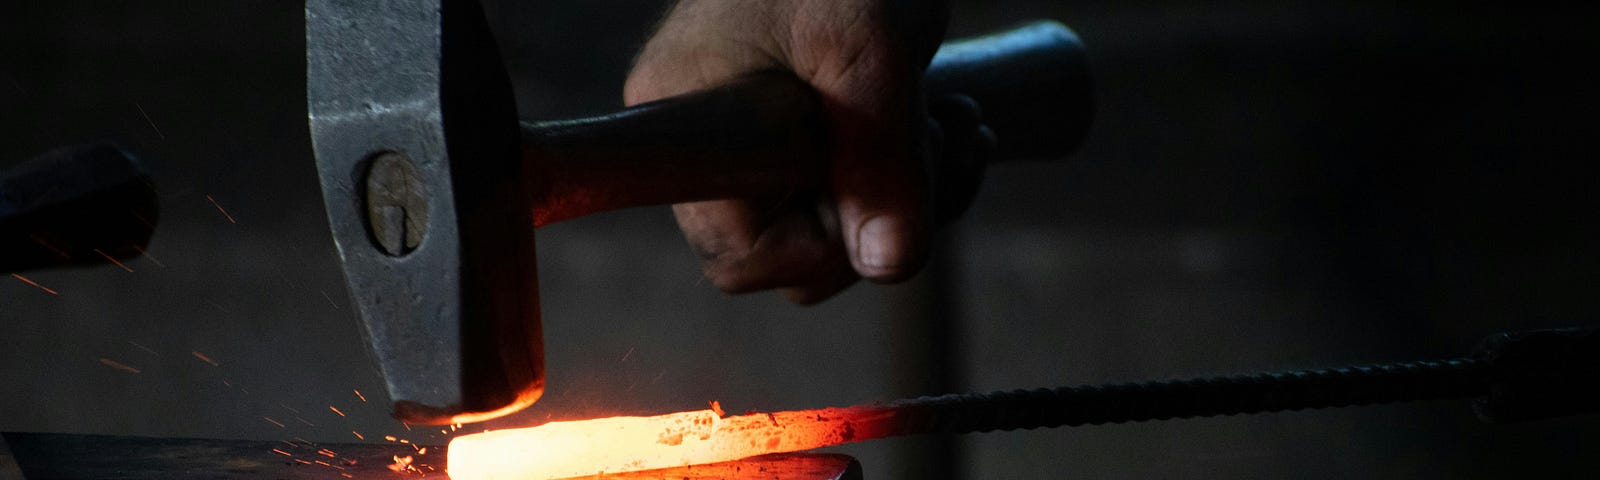 A blacksmith forging metal with hammer and anvil.